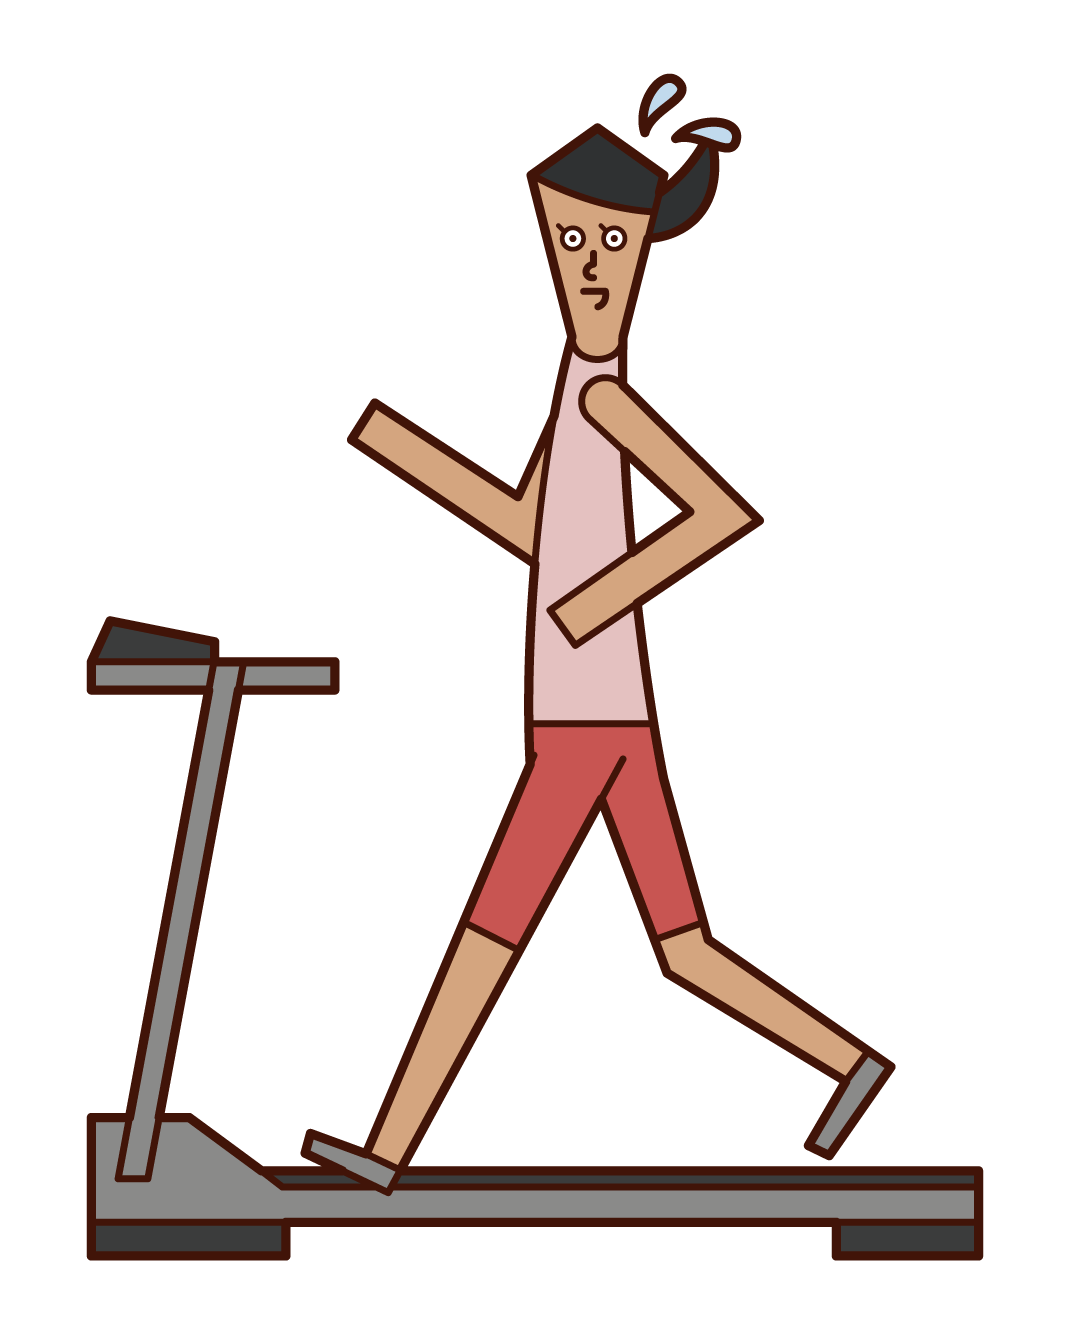 Illustration of a woman running on a running machine